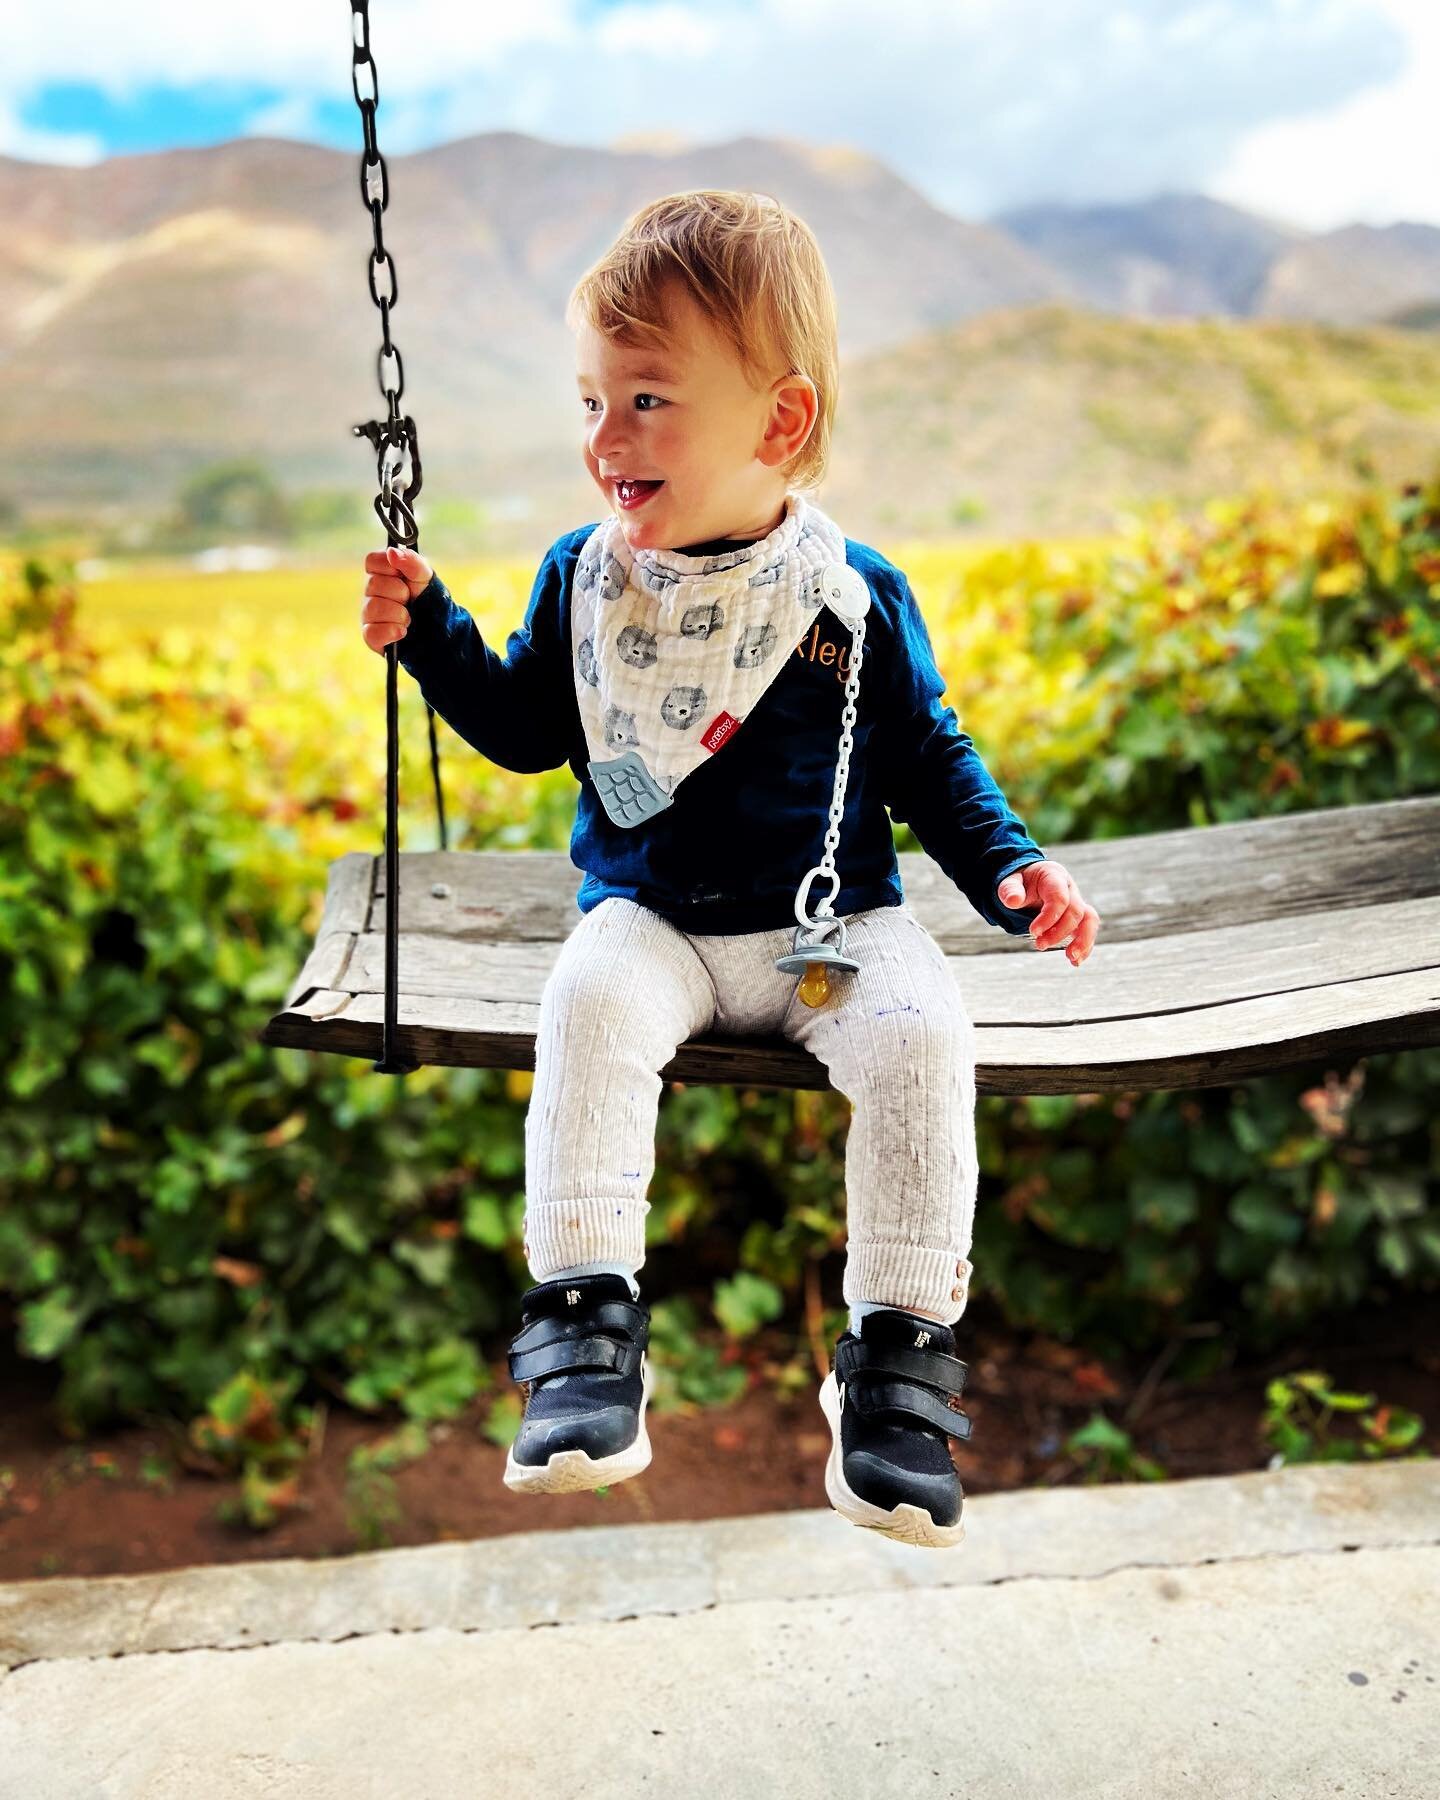 What a cute munchkin and perfect backdrop! So nice to be back in Africa. 🇿🇦 #cutestuff #southafricantourism #familytime #montagu #traveltheworld #swing #keepingupwiththejonescollection #thejonescollection #kids #travellingwithkids #travelwithme